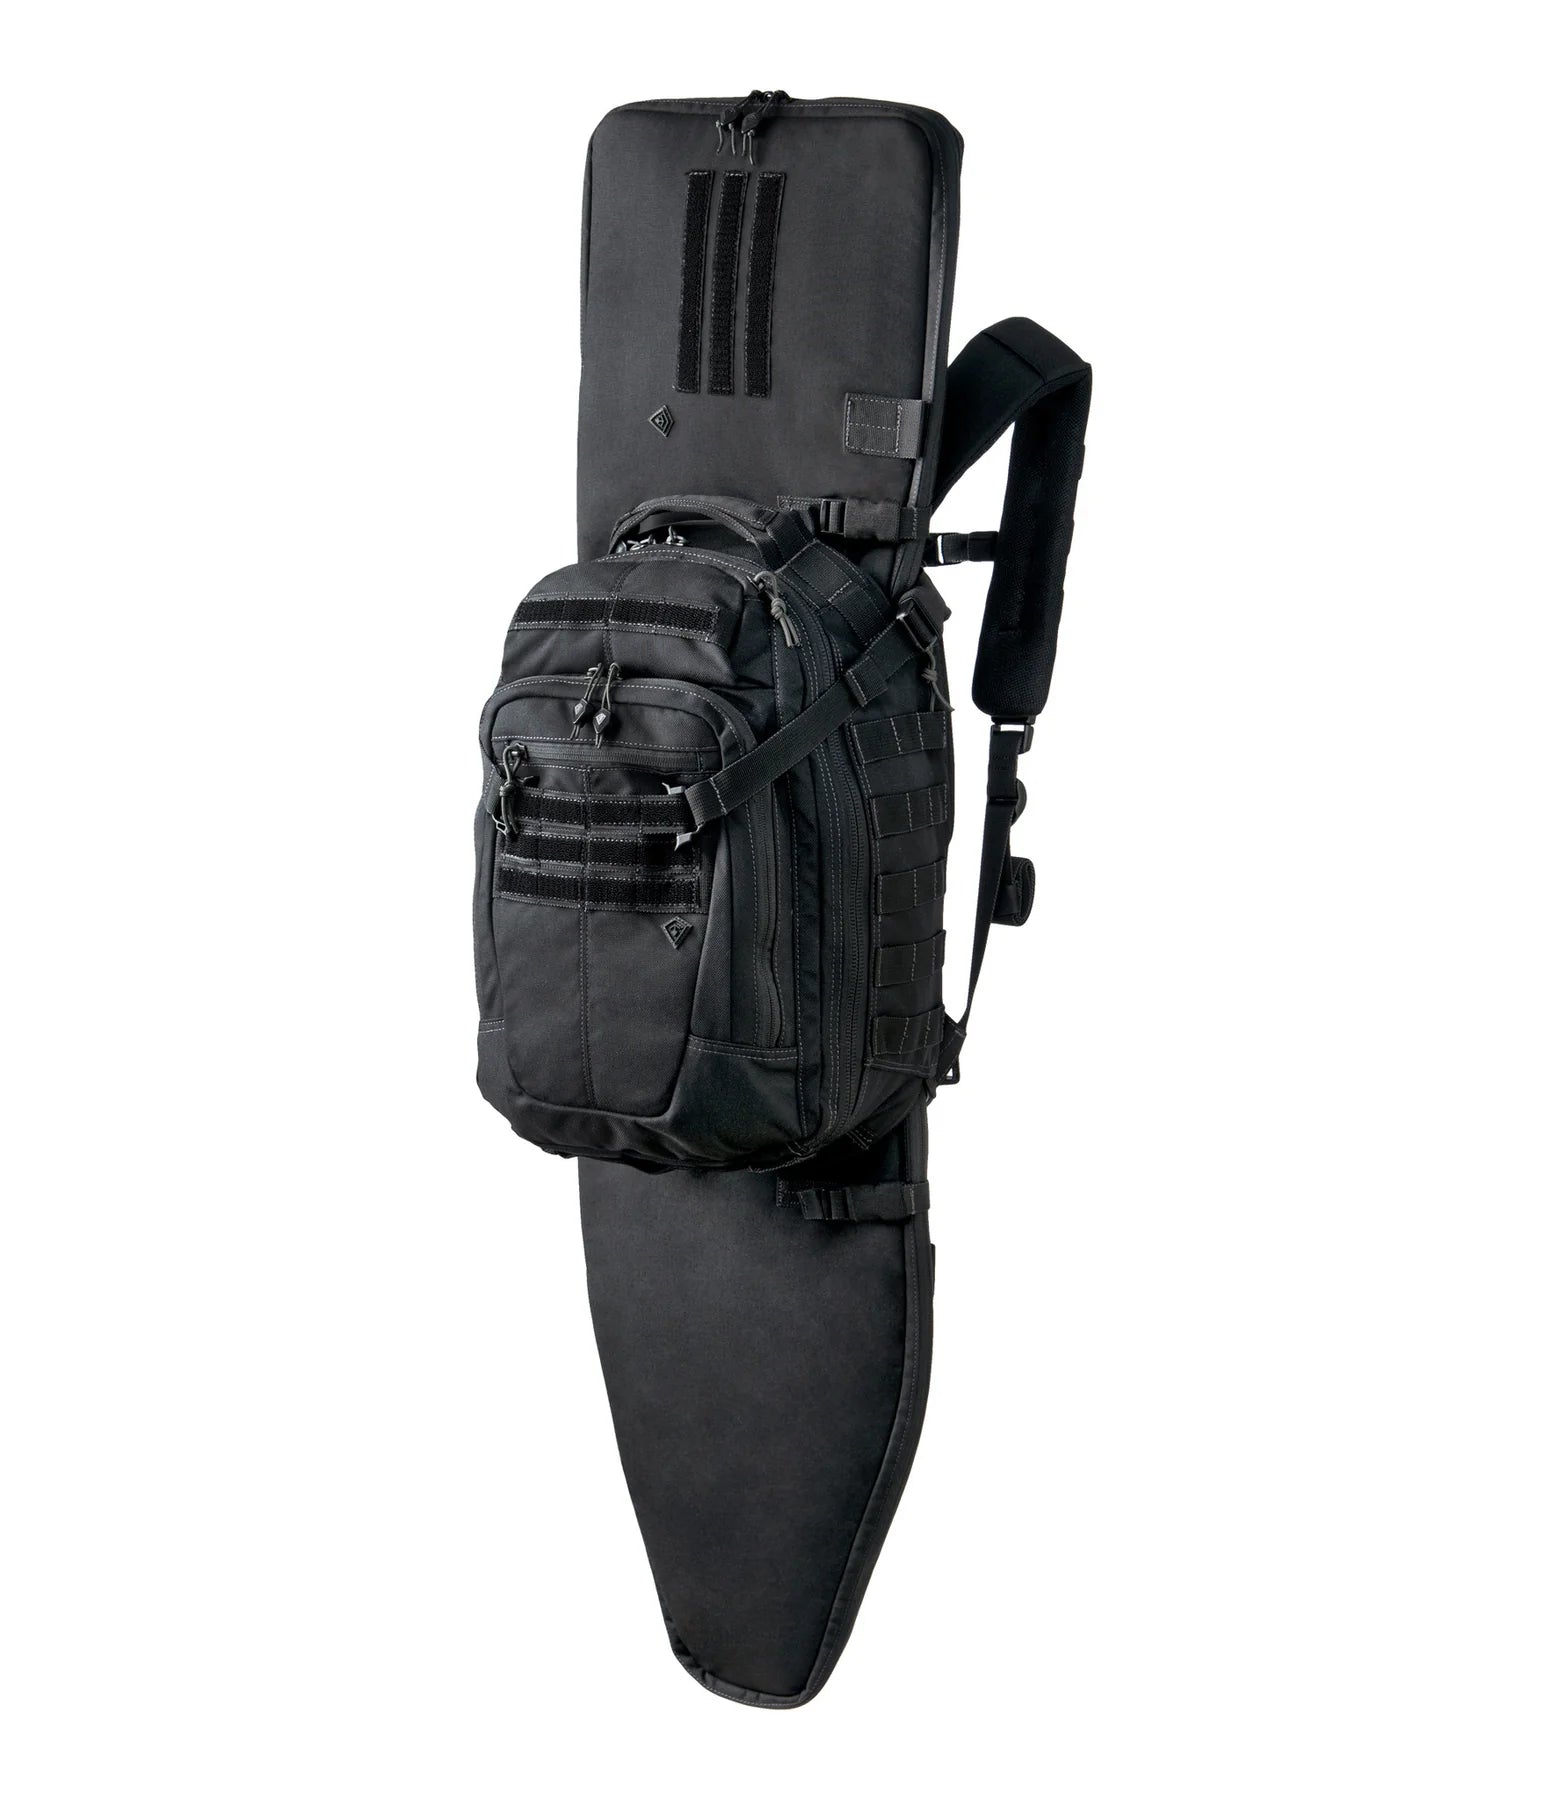 First Tactical Specialist BackPack 0.5D 25L 180006 - Black